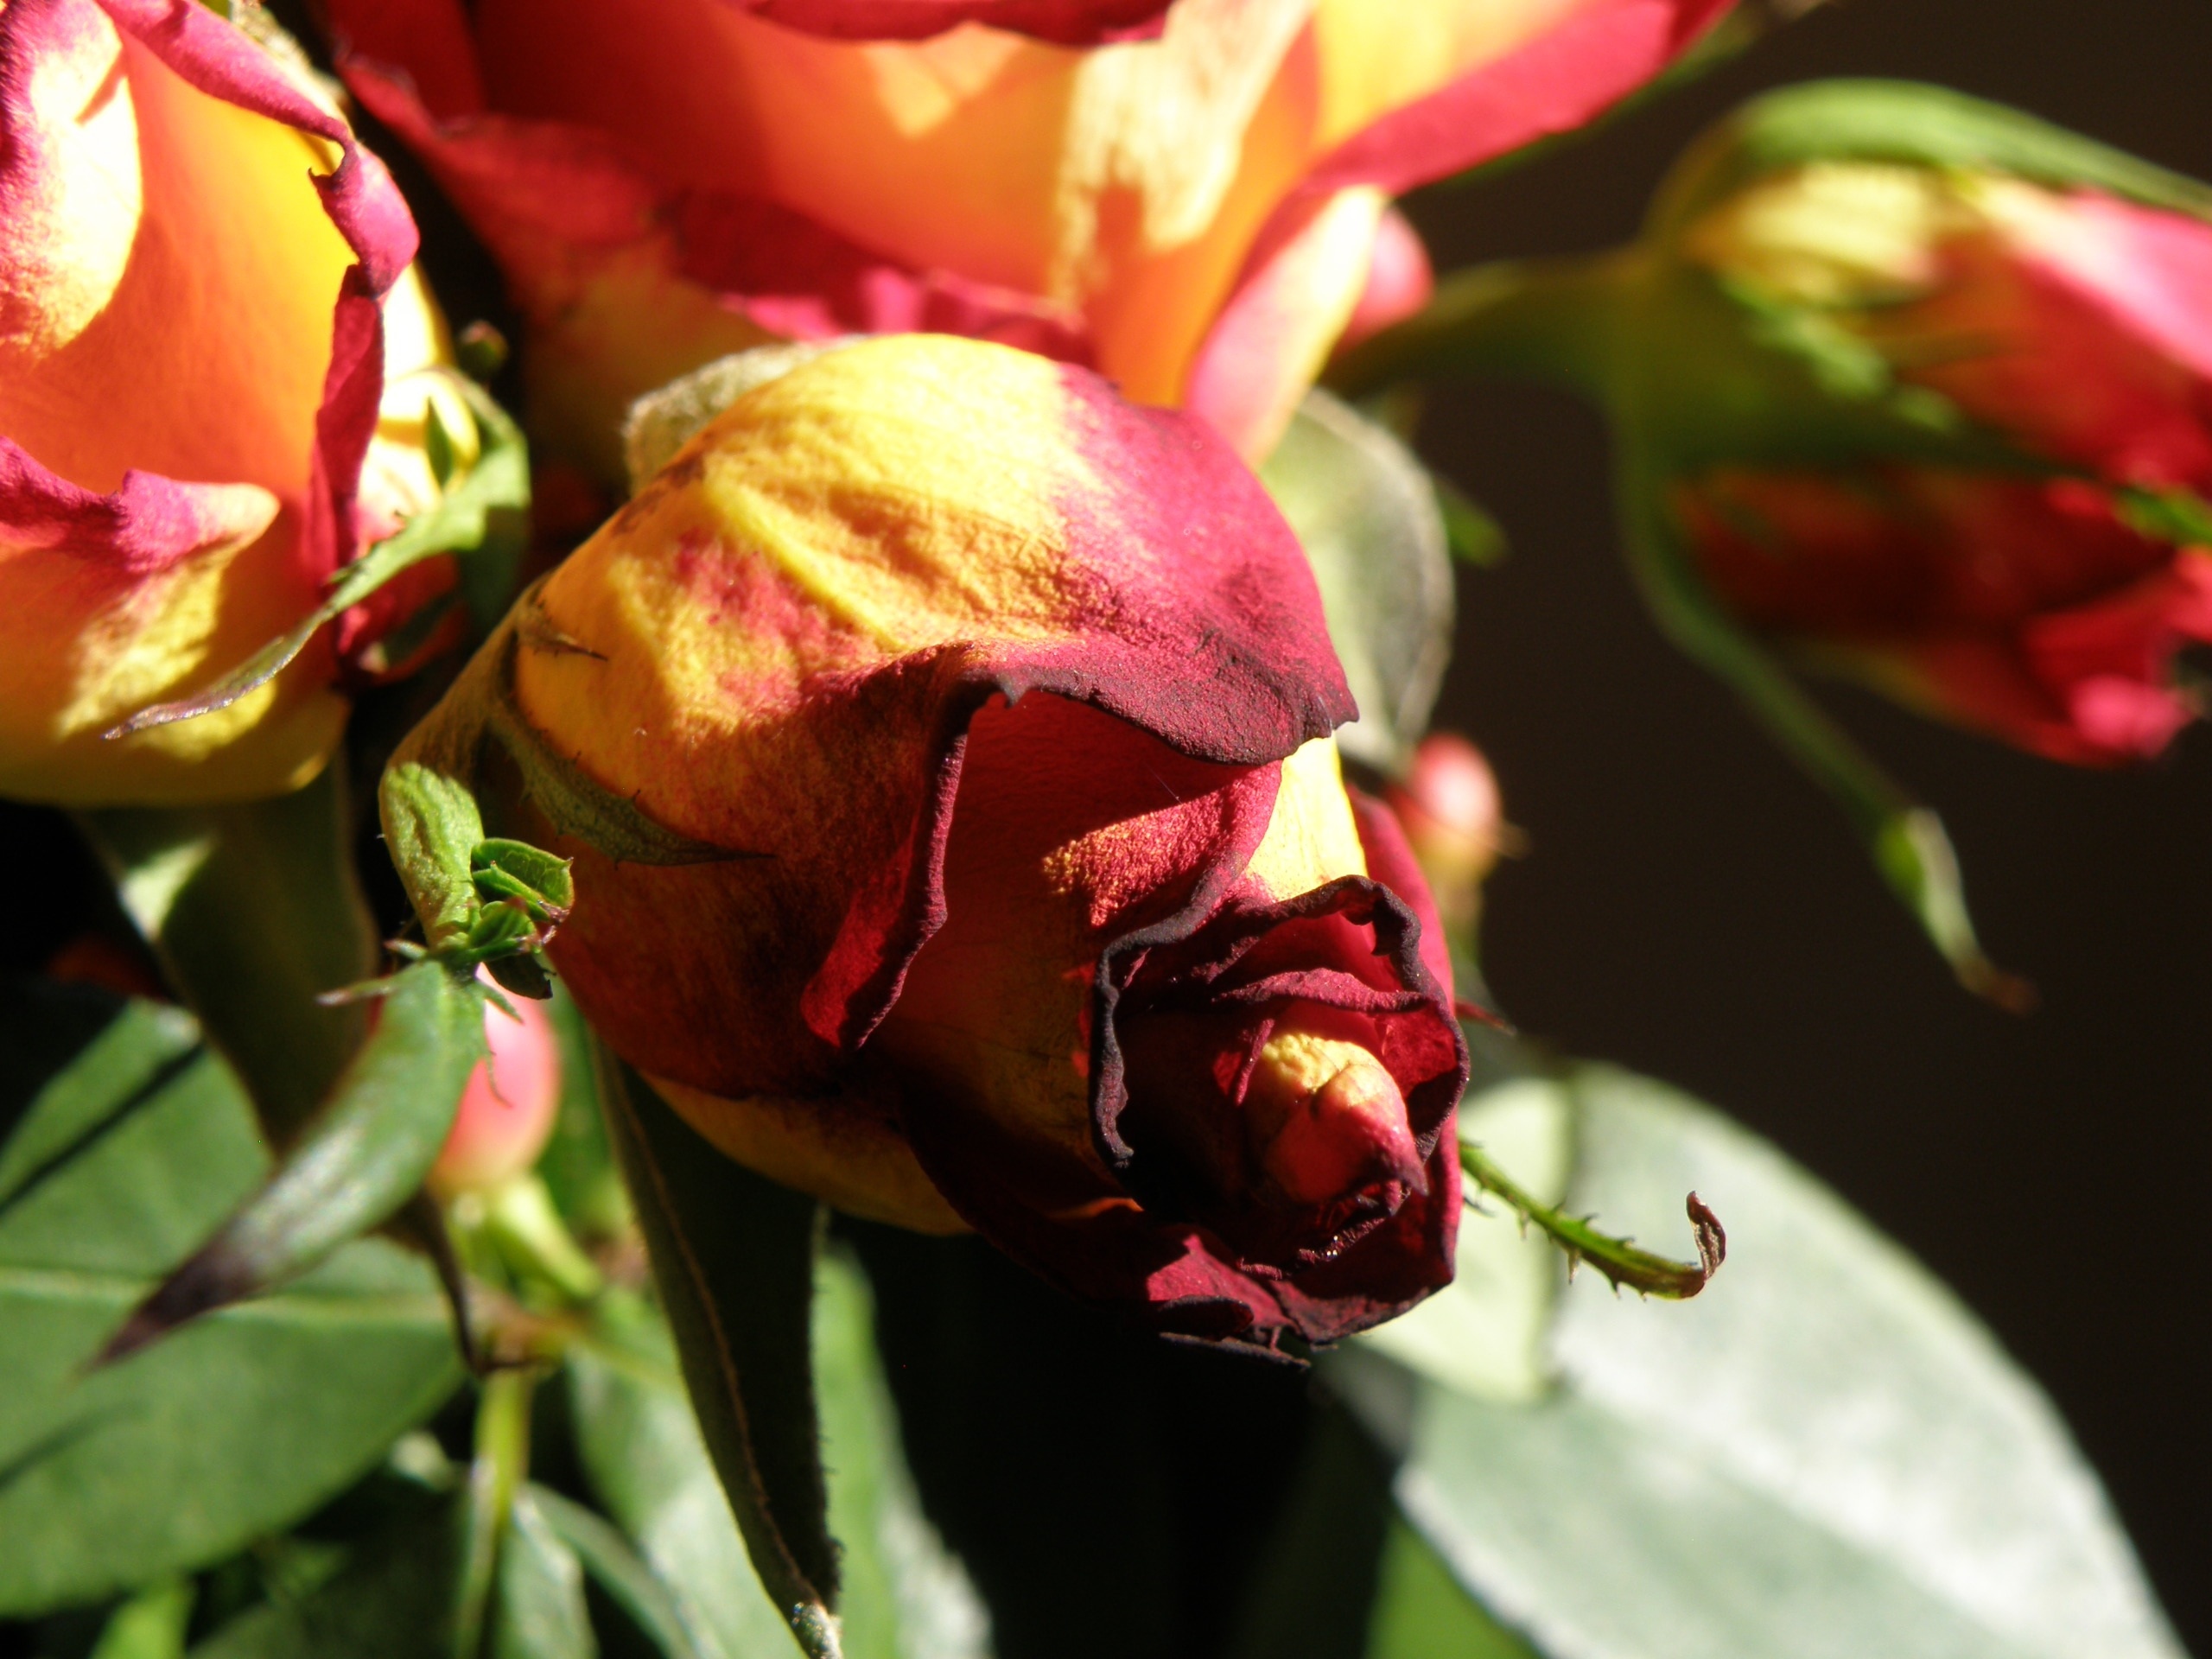 red and yellow roses